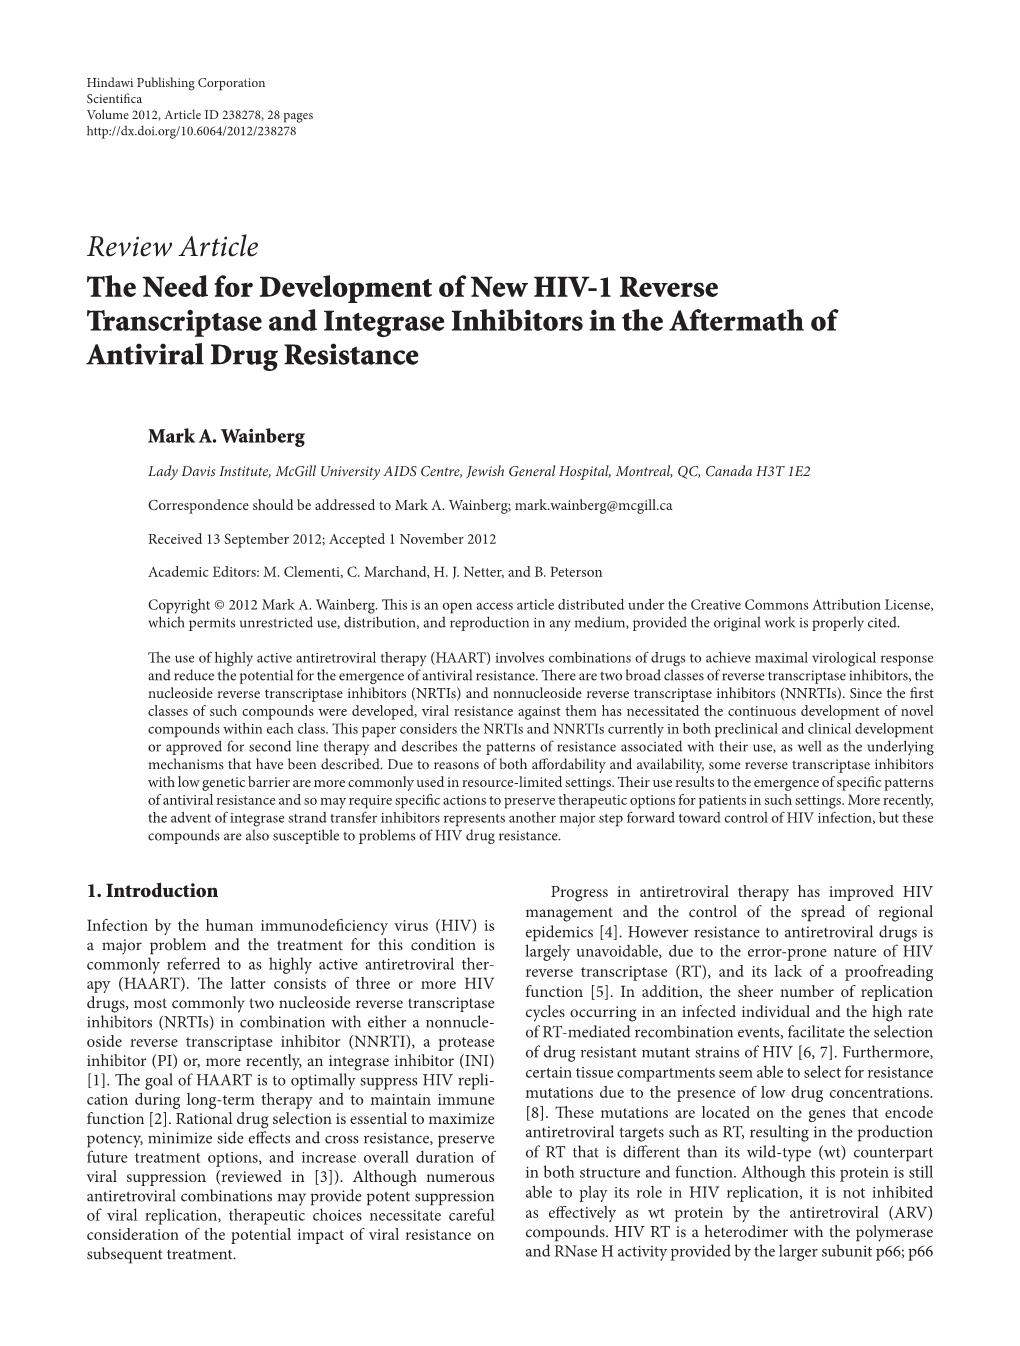 The Need for Development of New HIV-1 Reverse Transcriptase and Integrase Inhibitors in the Aftermath of Antiviral Drug Resistance